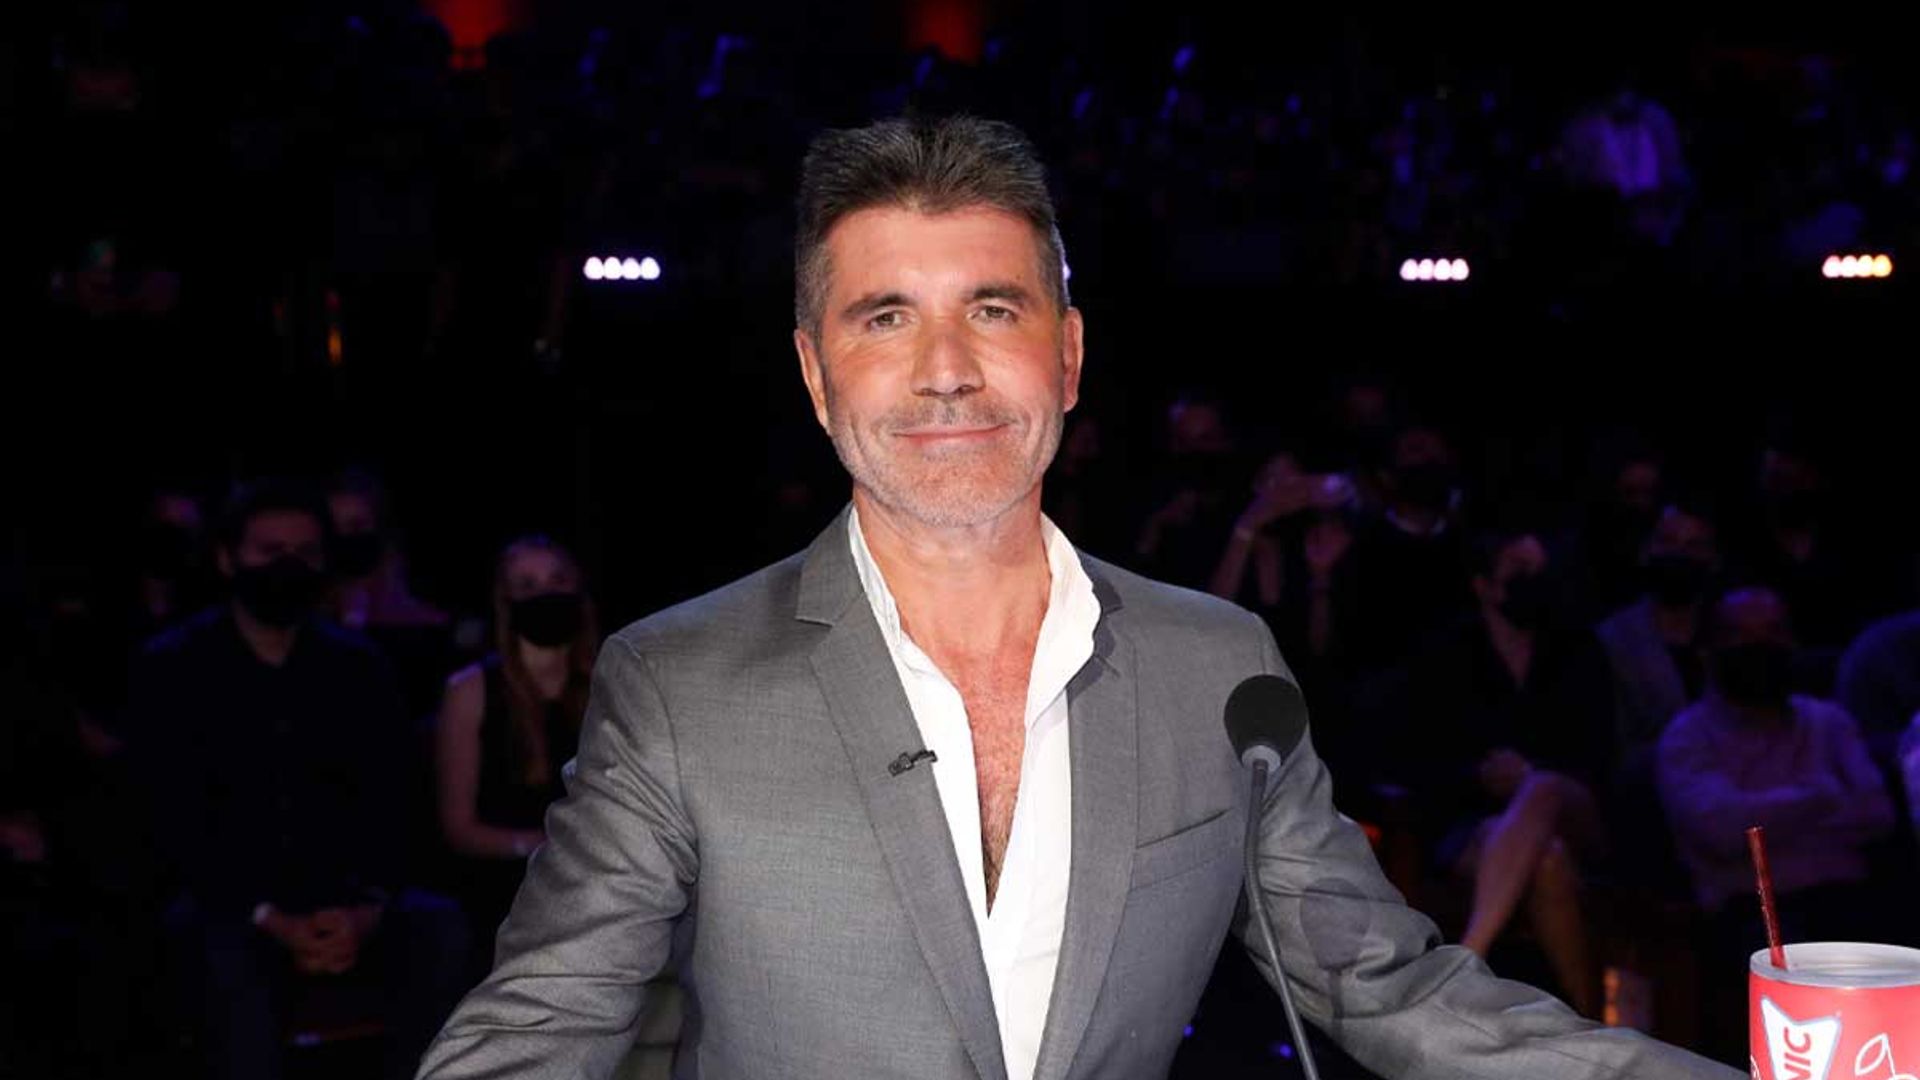 Simon Cowell and Britain's Got Talent future revealed following cancellation news